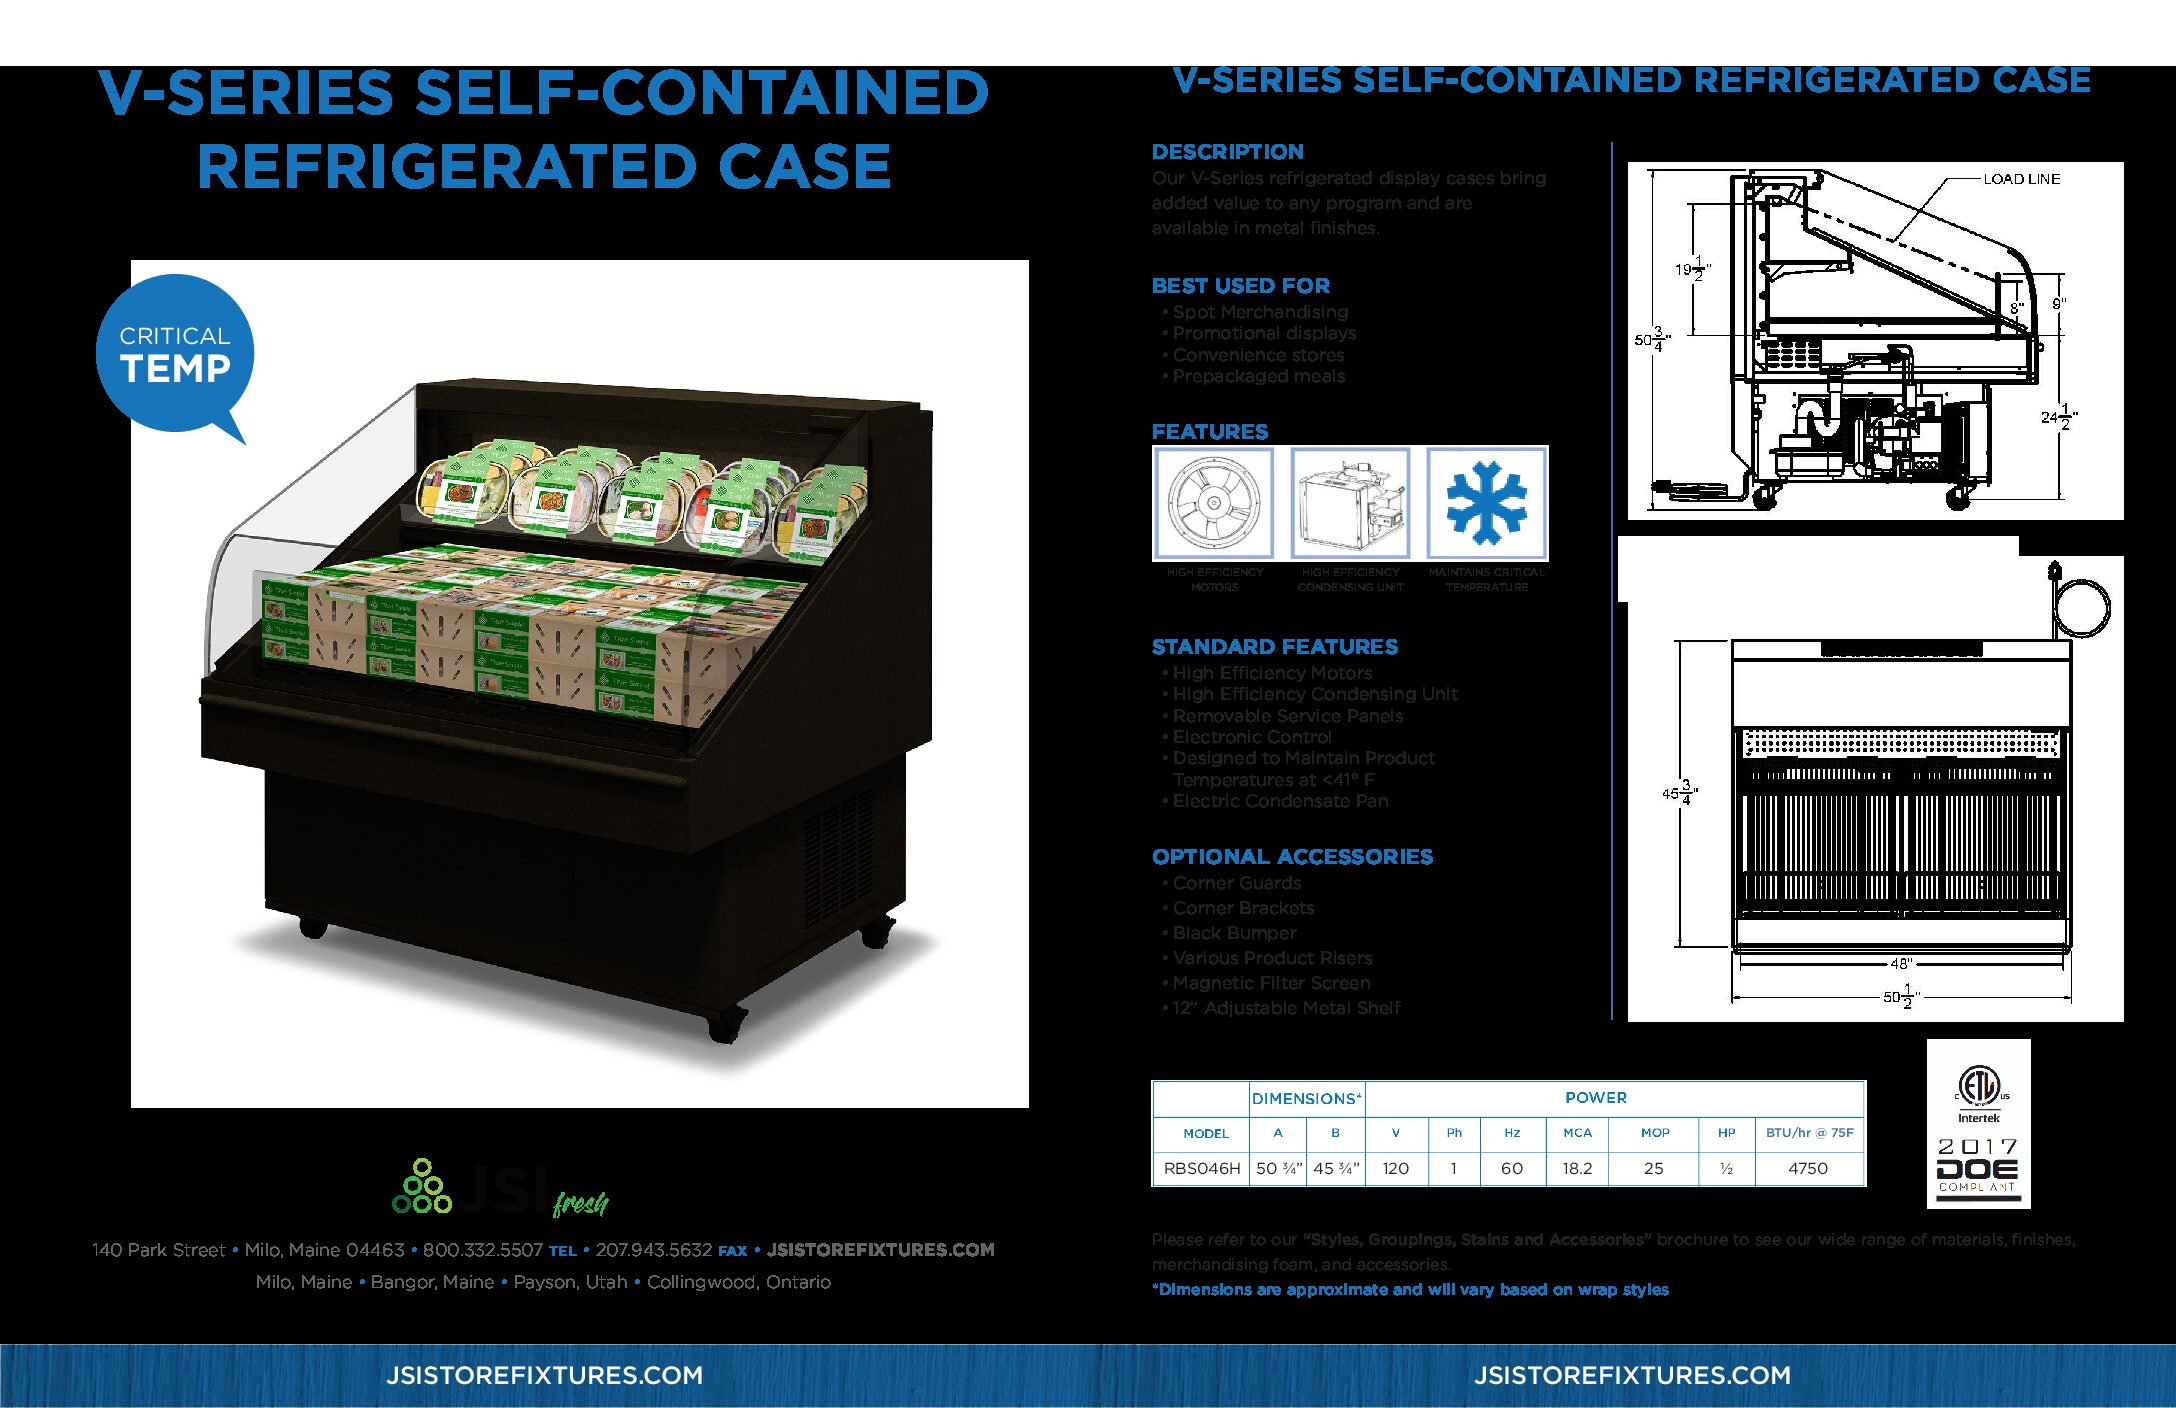 V-Series Self-Contained Refrigerated Case Spec Sheet (PDF)